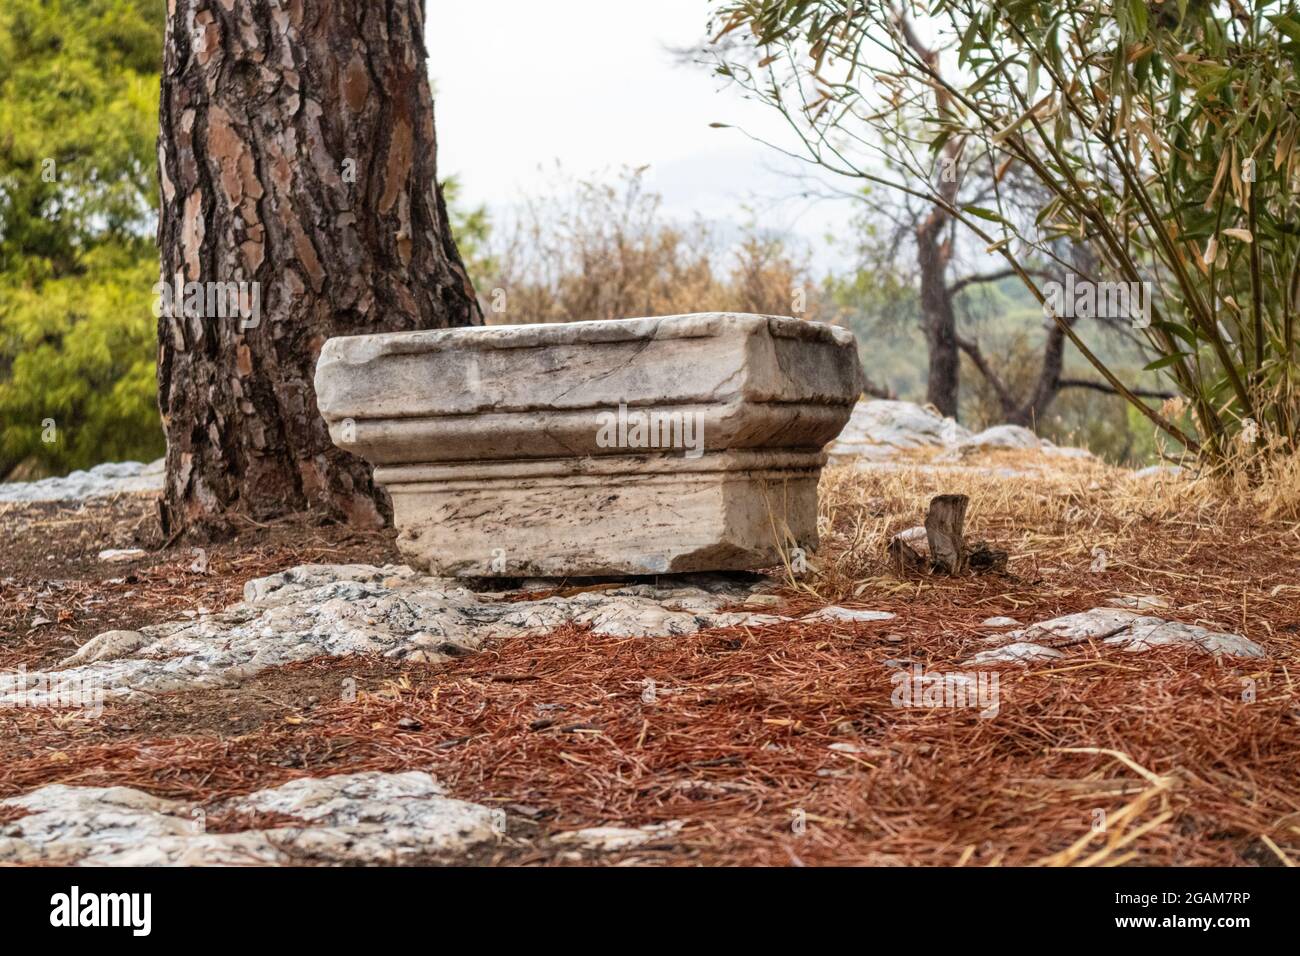 Ancient architecture capital or chapiter part of column or pillar remains next to pine tree in archeological site in Athens, Greece Stock Photo